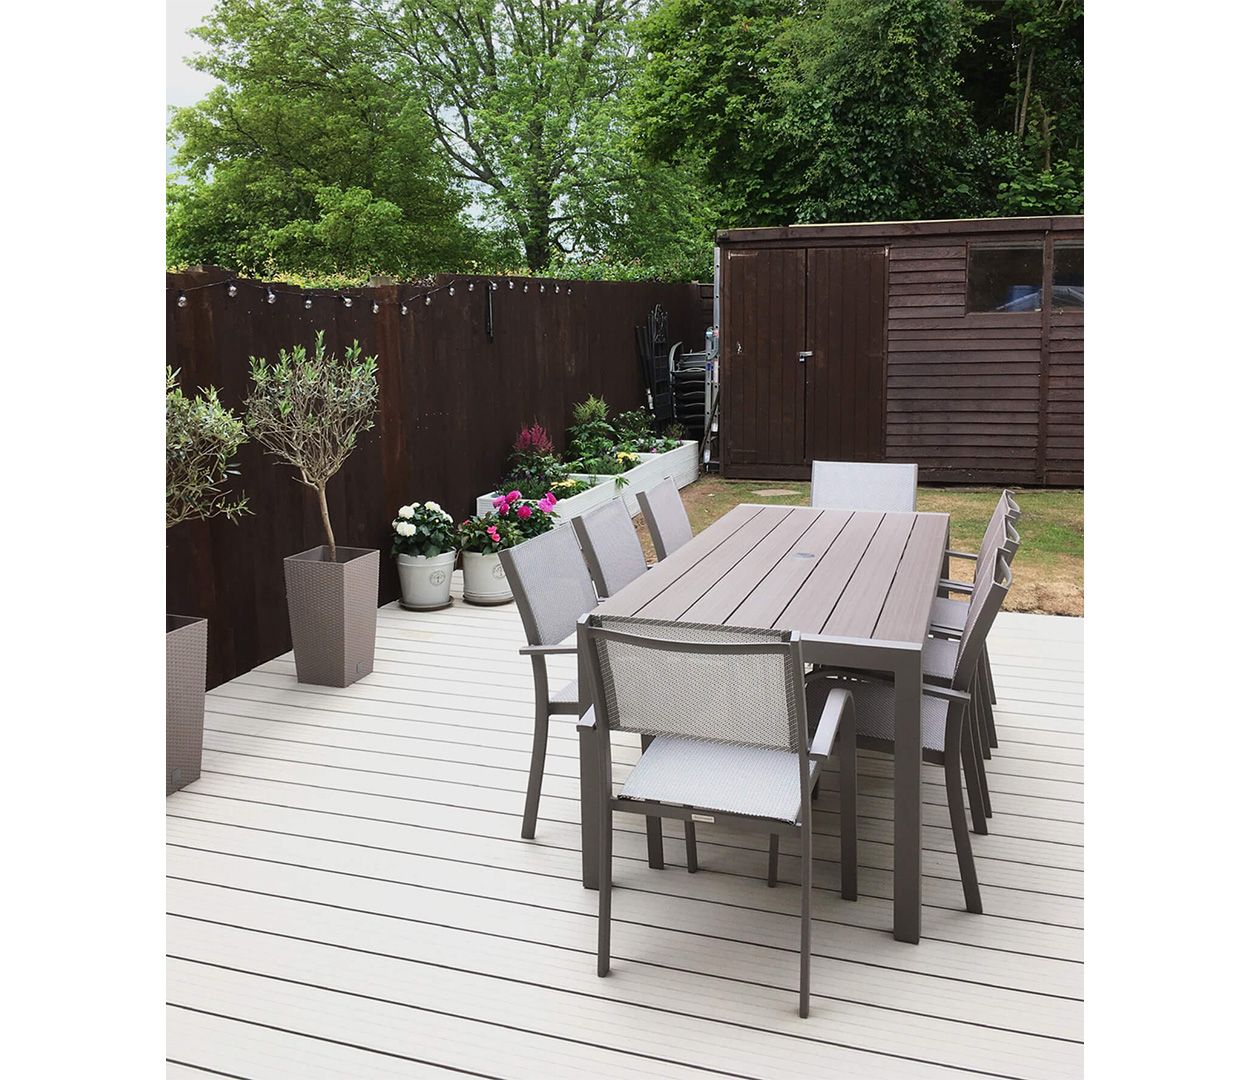 Cladco Composite Ivory Decking Boards bring a burst of brightness into this garden